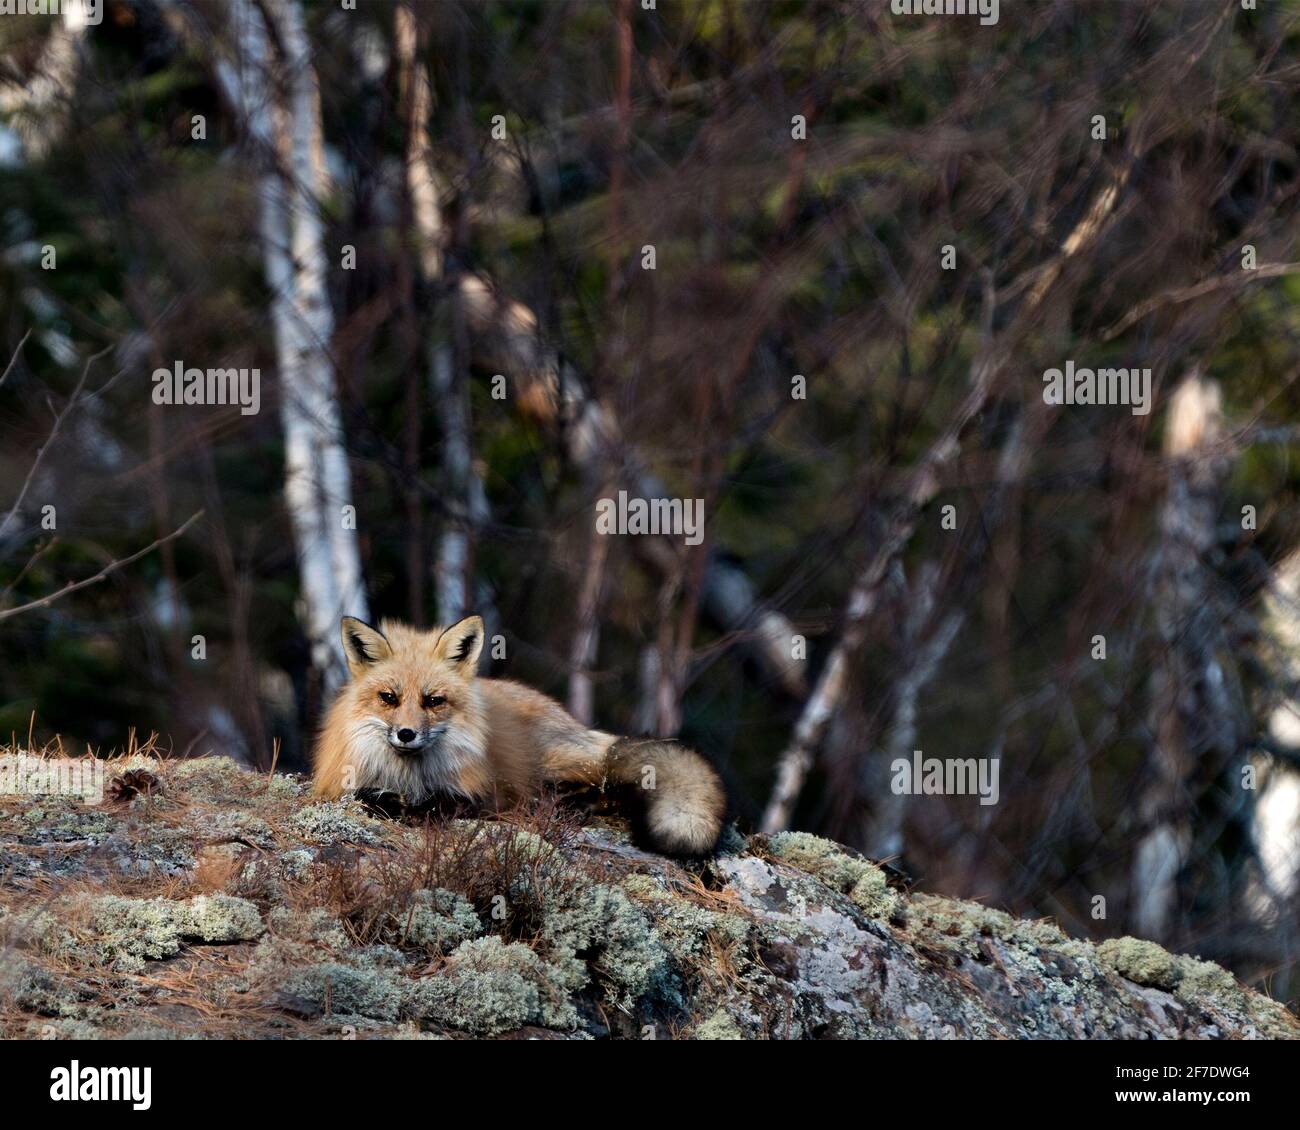 Red Fox laying down on a moss rock with blur background in its environment and habitat displaying fox tail, fur. Fox Image. Picture. Portrait. Photo. Stock Photo